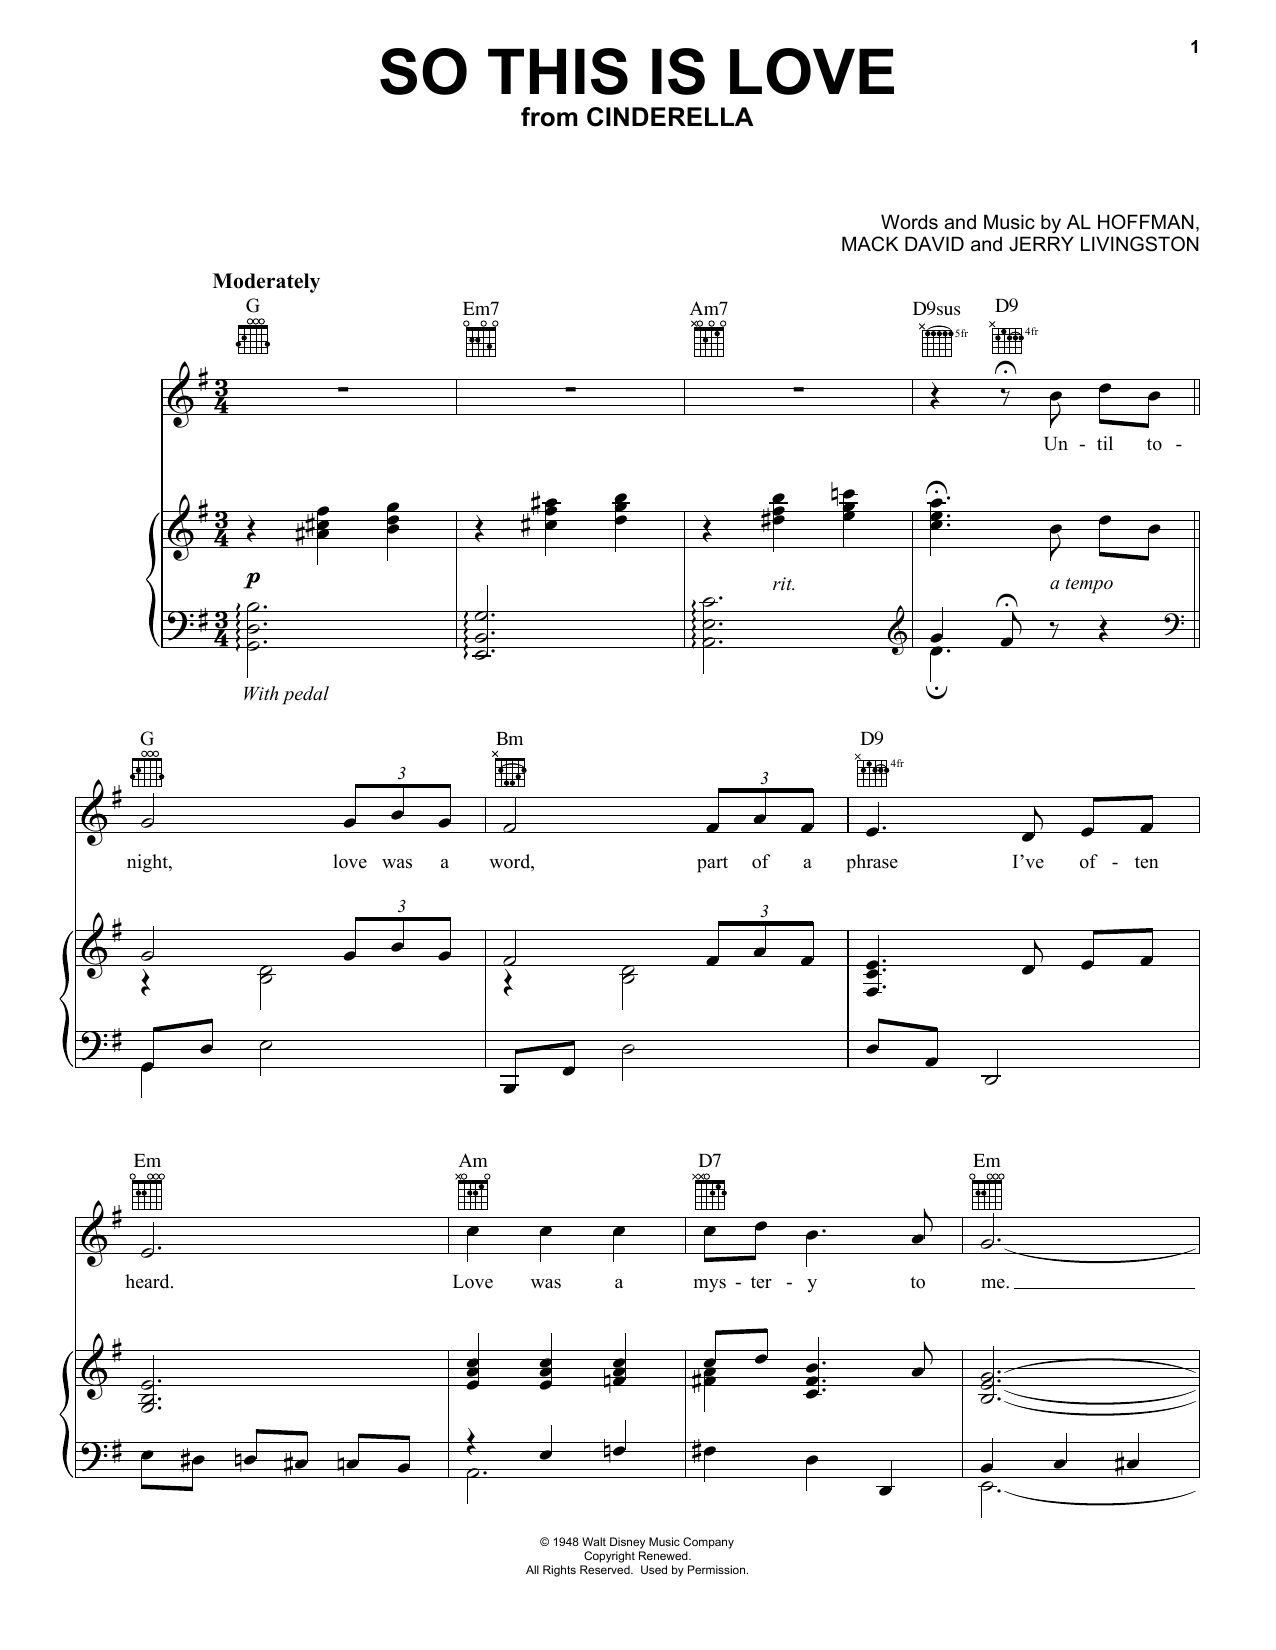 Mack David So This Is Love (The Cinderella Waltz) sheet music notes and chords. Download Printable PDF.